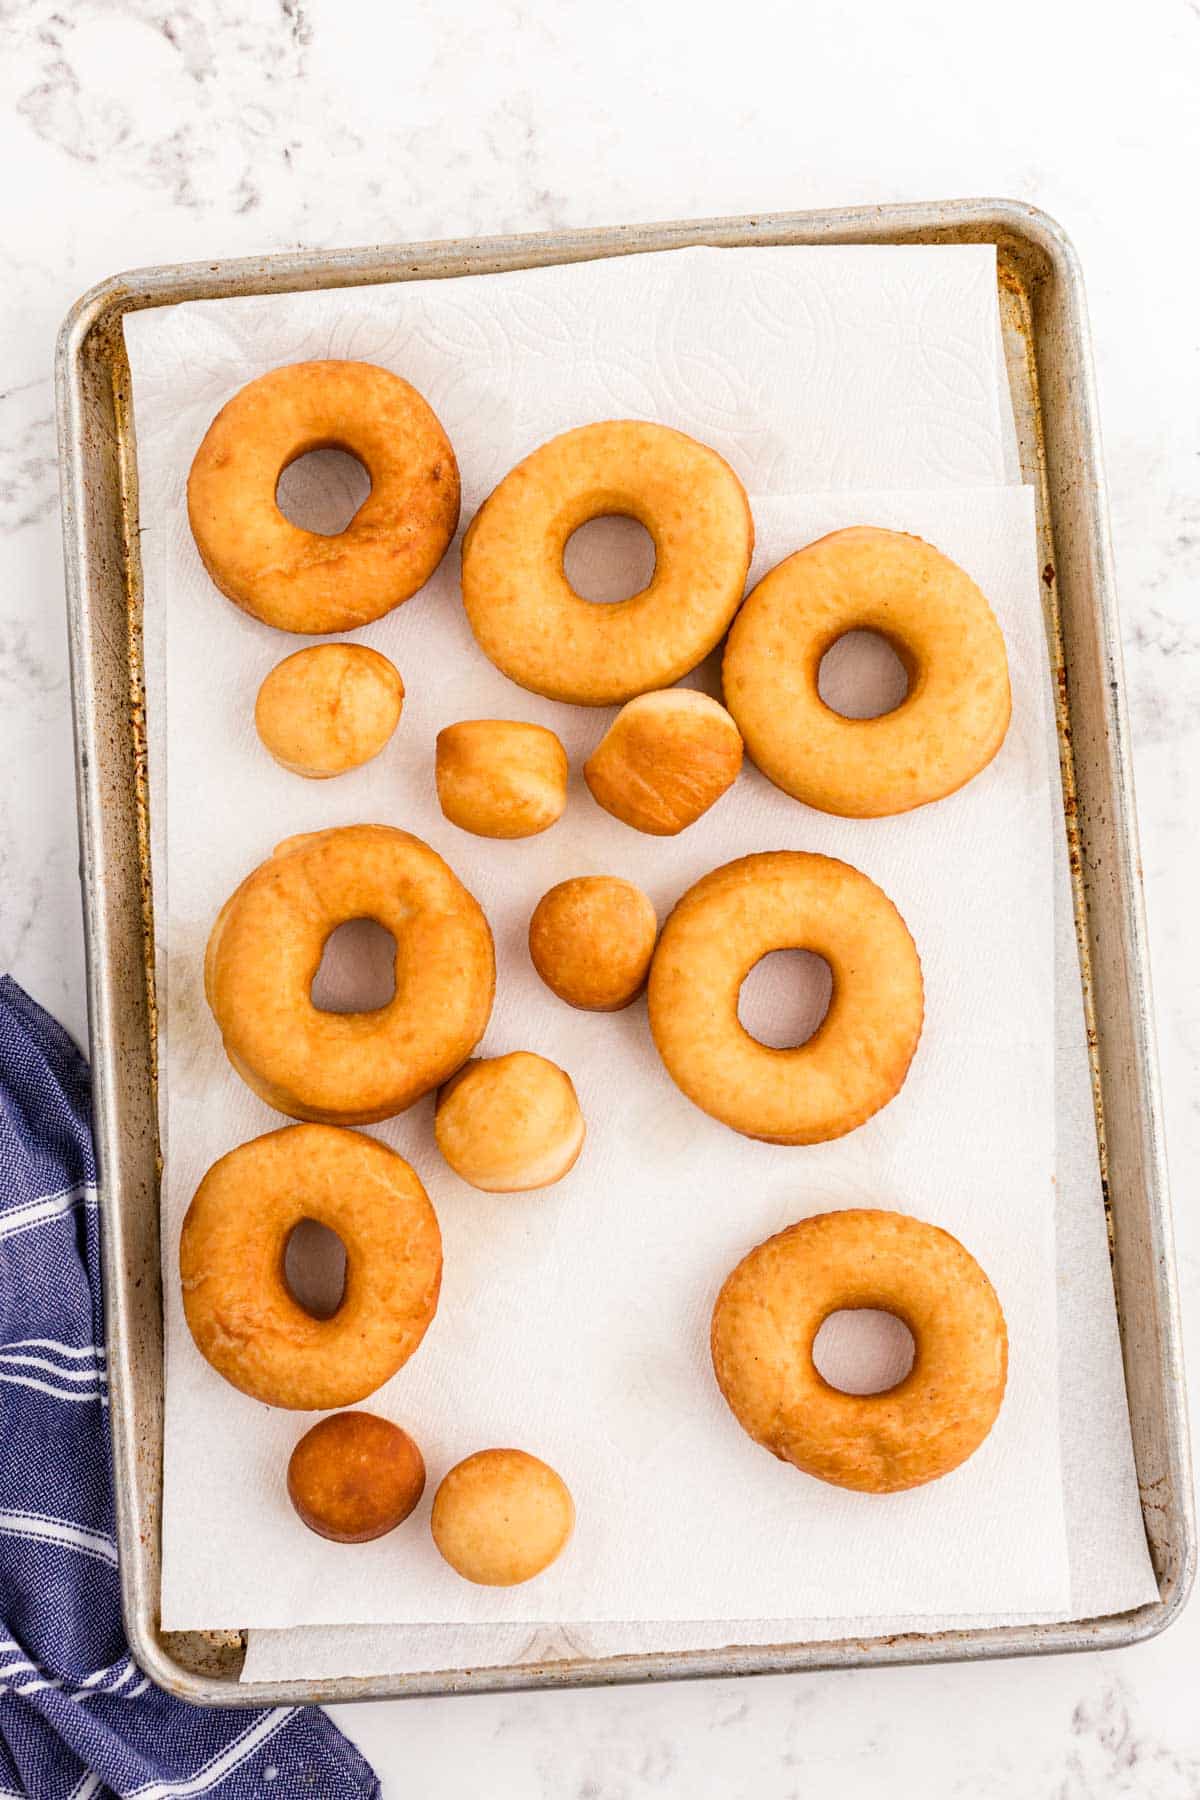 Fried donuts on a paper towel lined baking sheet.